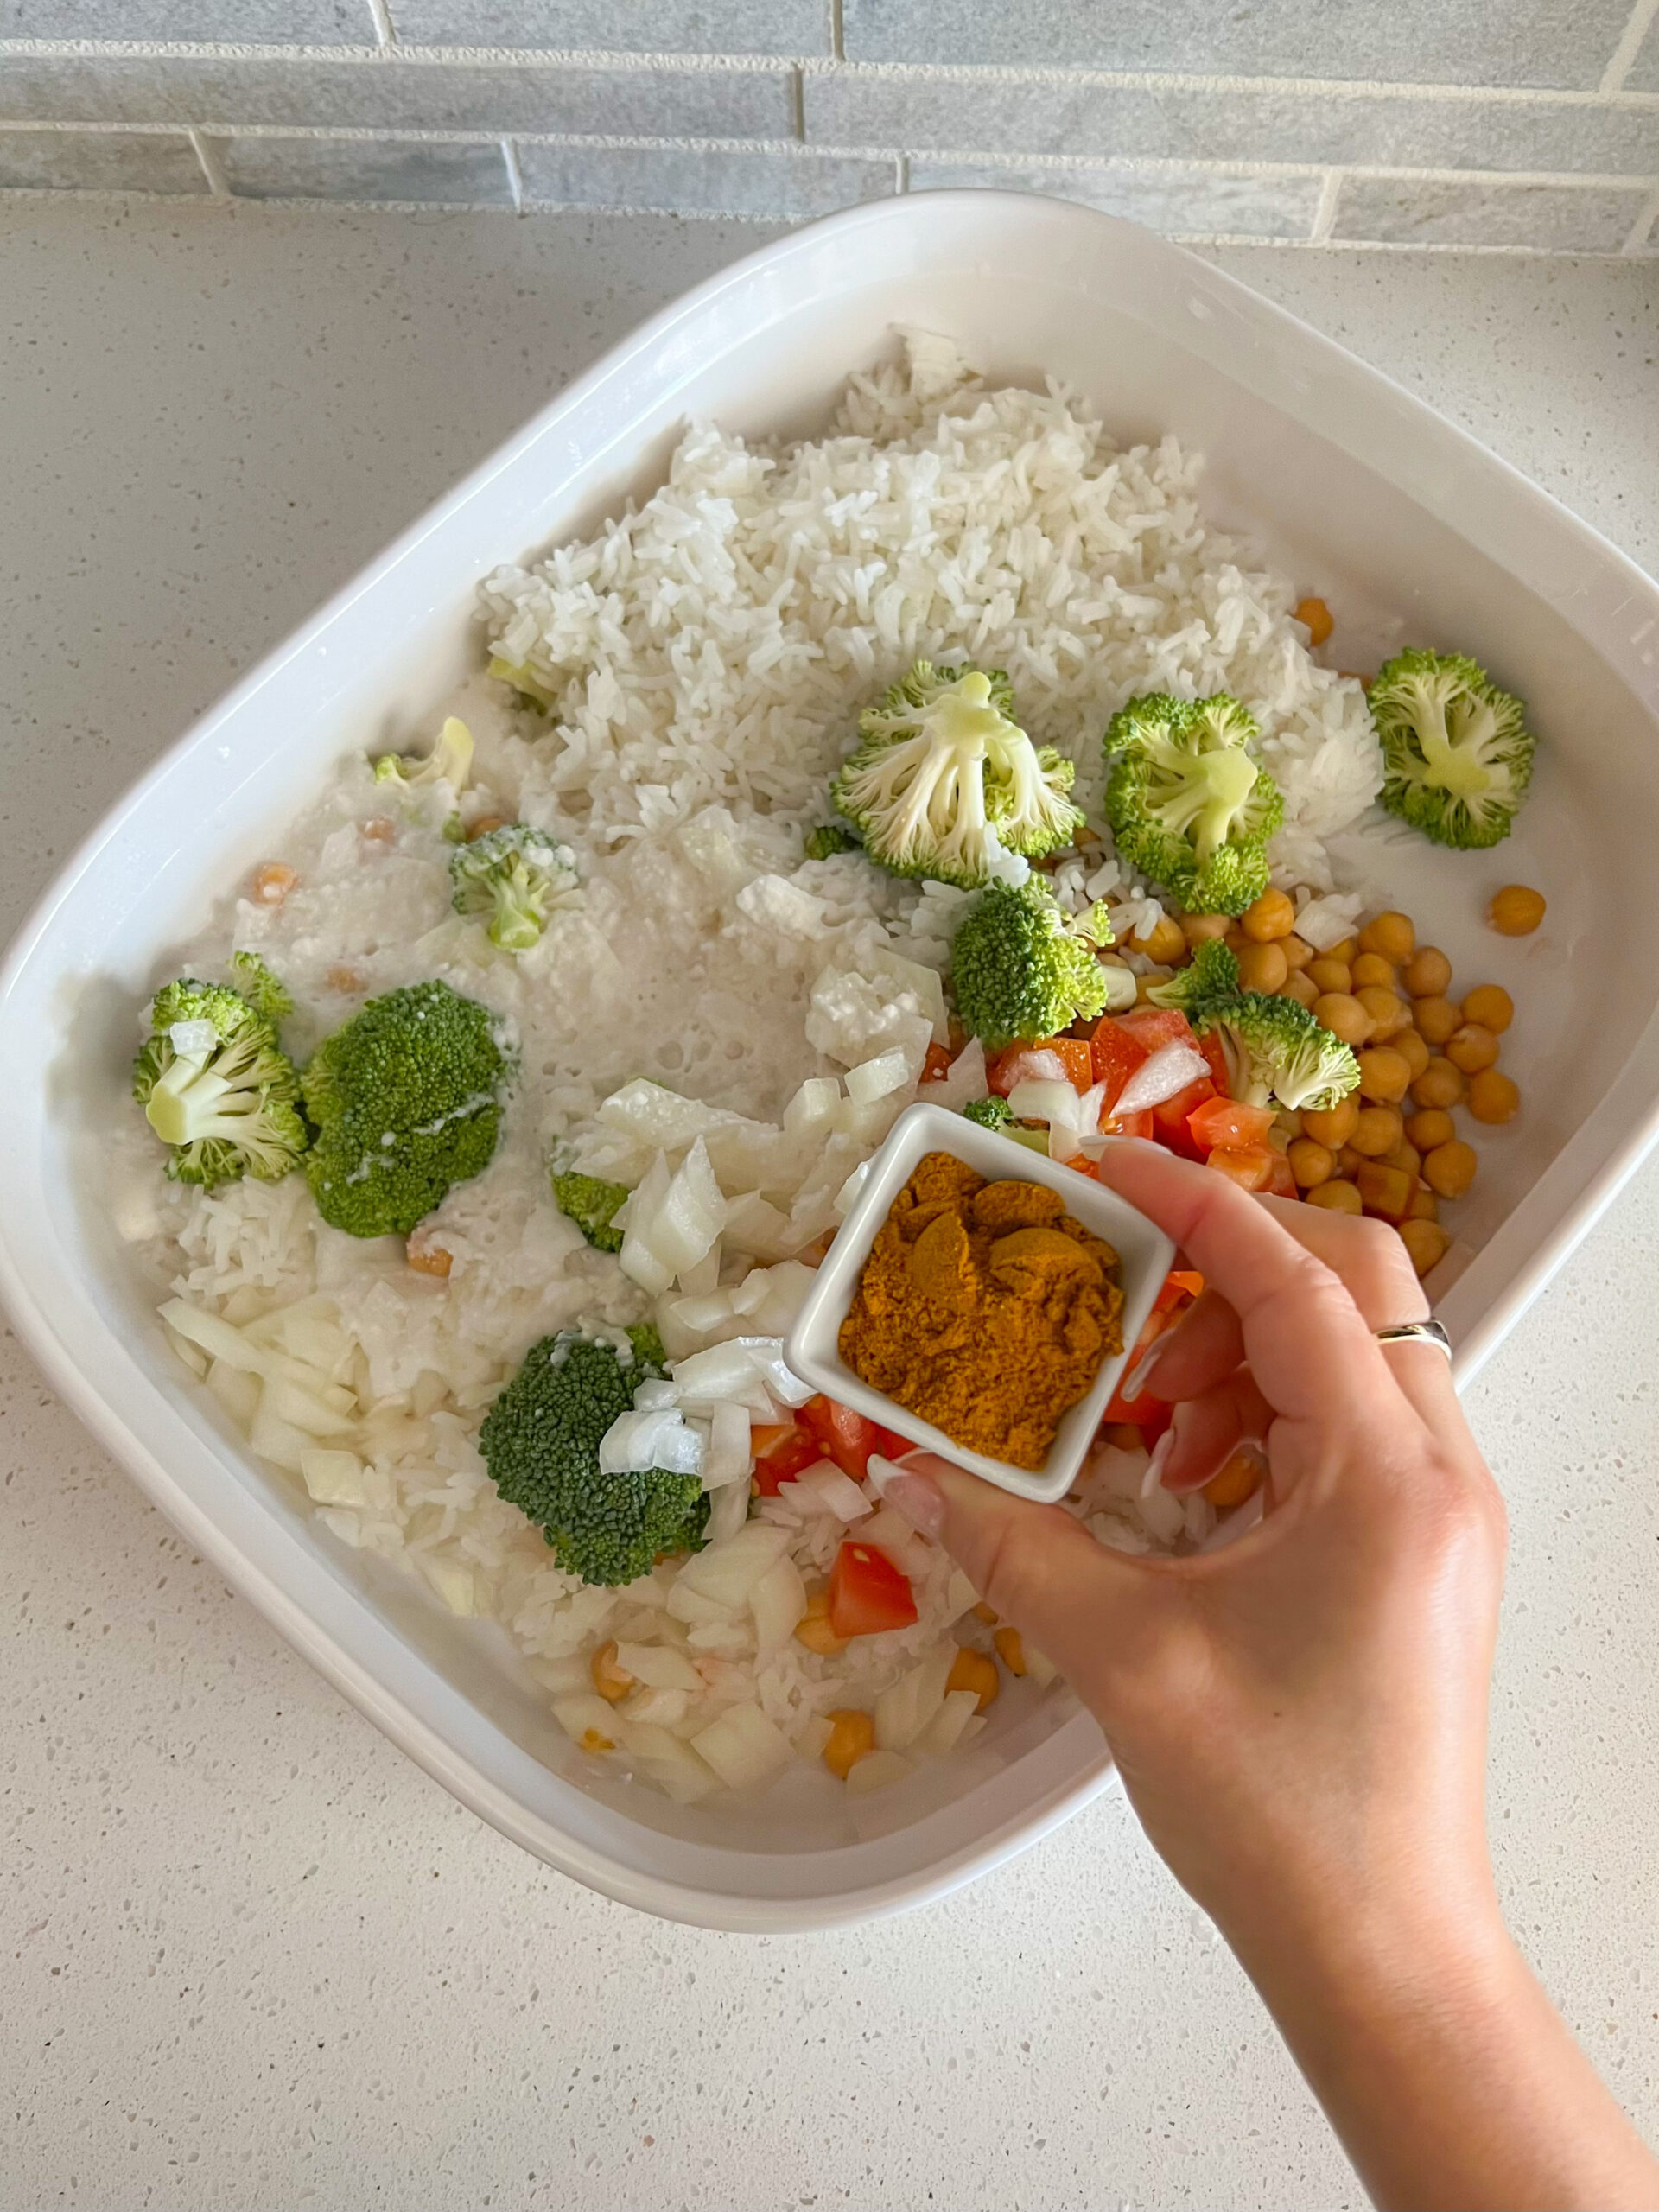 Rice and vegetable mixture in a casserole dish with a hand holding the spices above it.